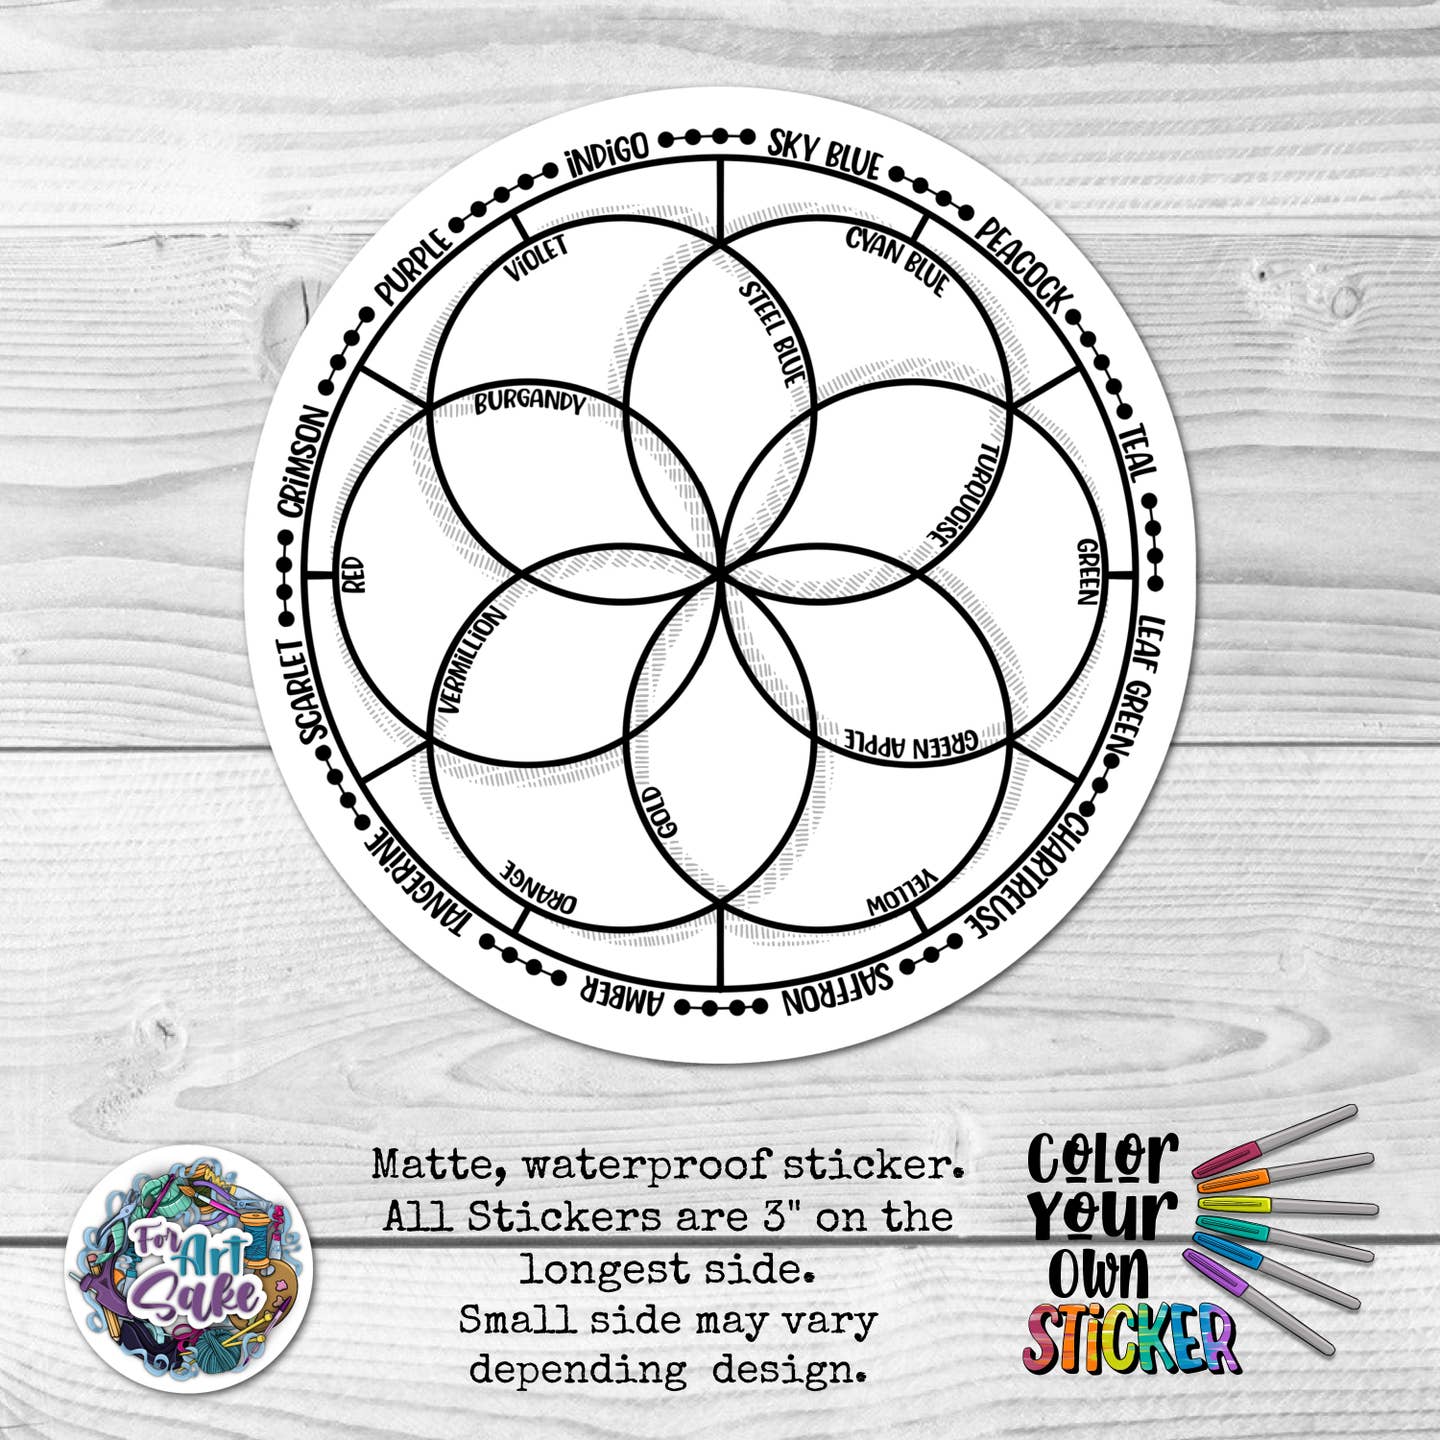 Color Your Own Stickers - Odd Nodd Art Supply